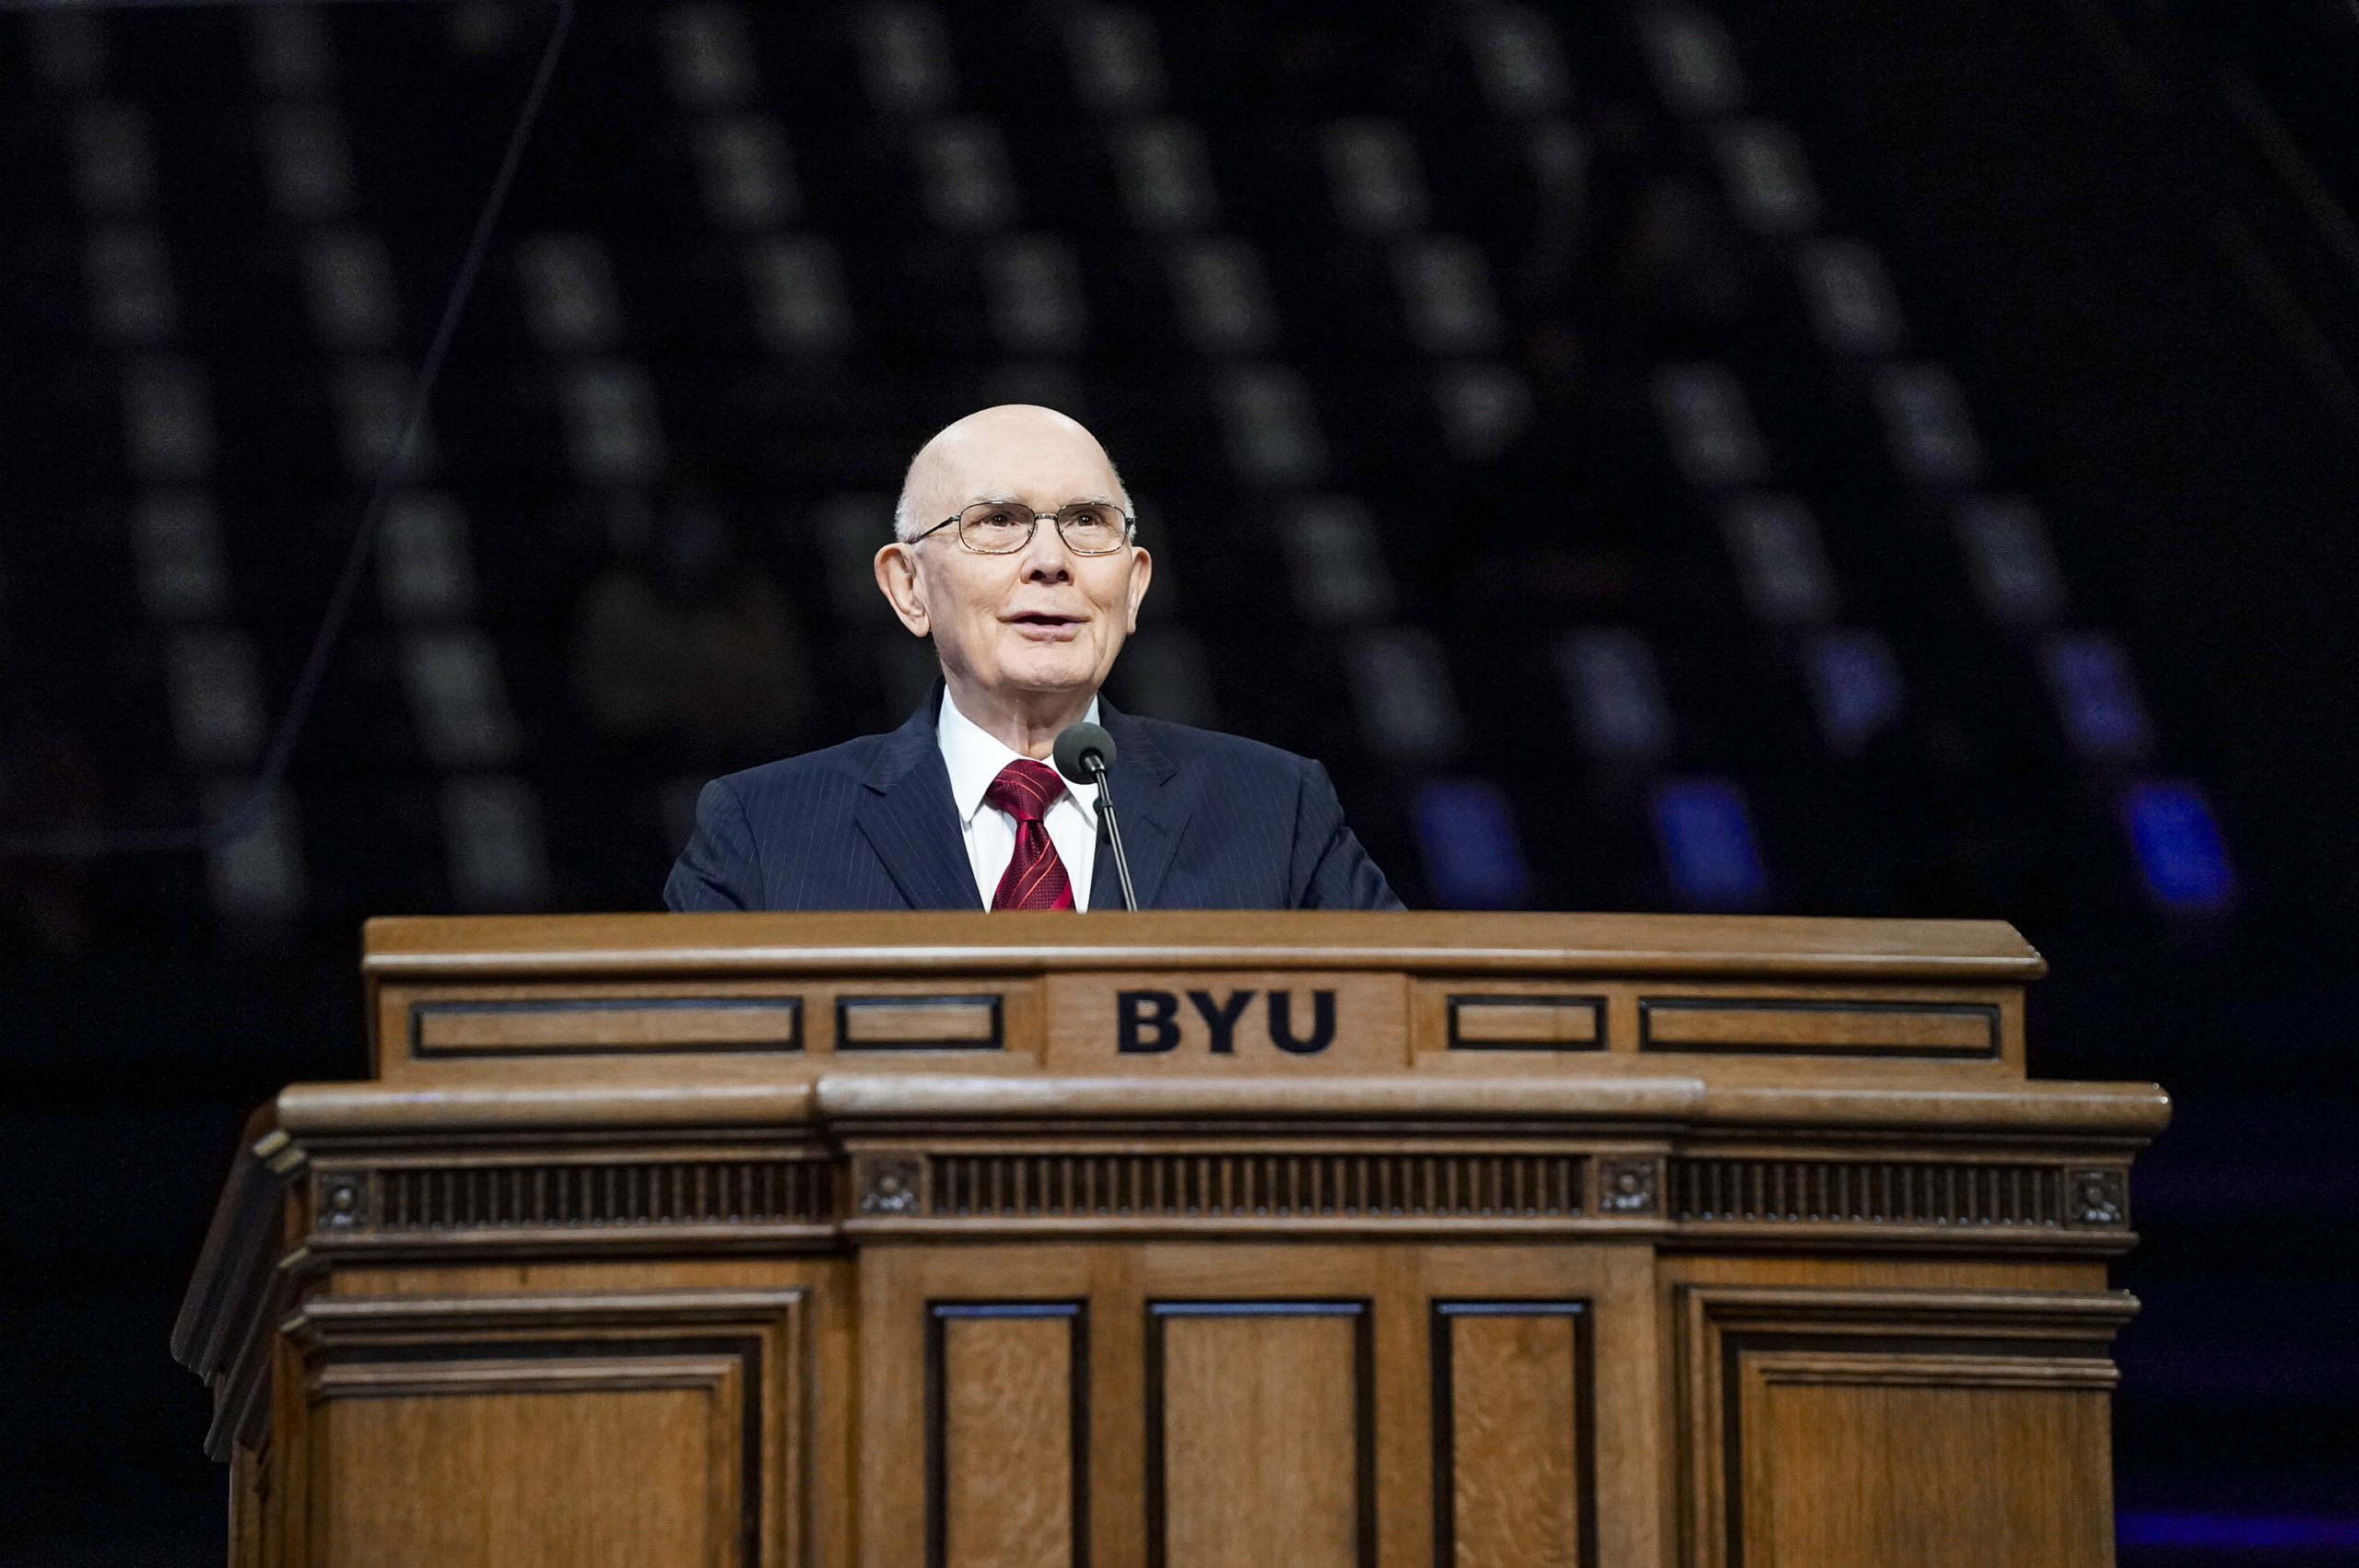 President Dallin H. Oaks says Black lives matter, urges all to rely on  Christ during challenges - The Daily Universe